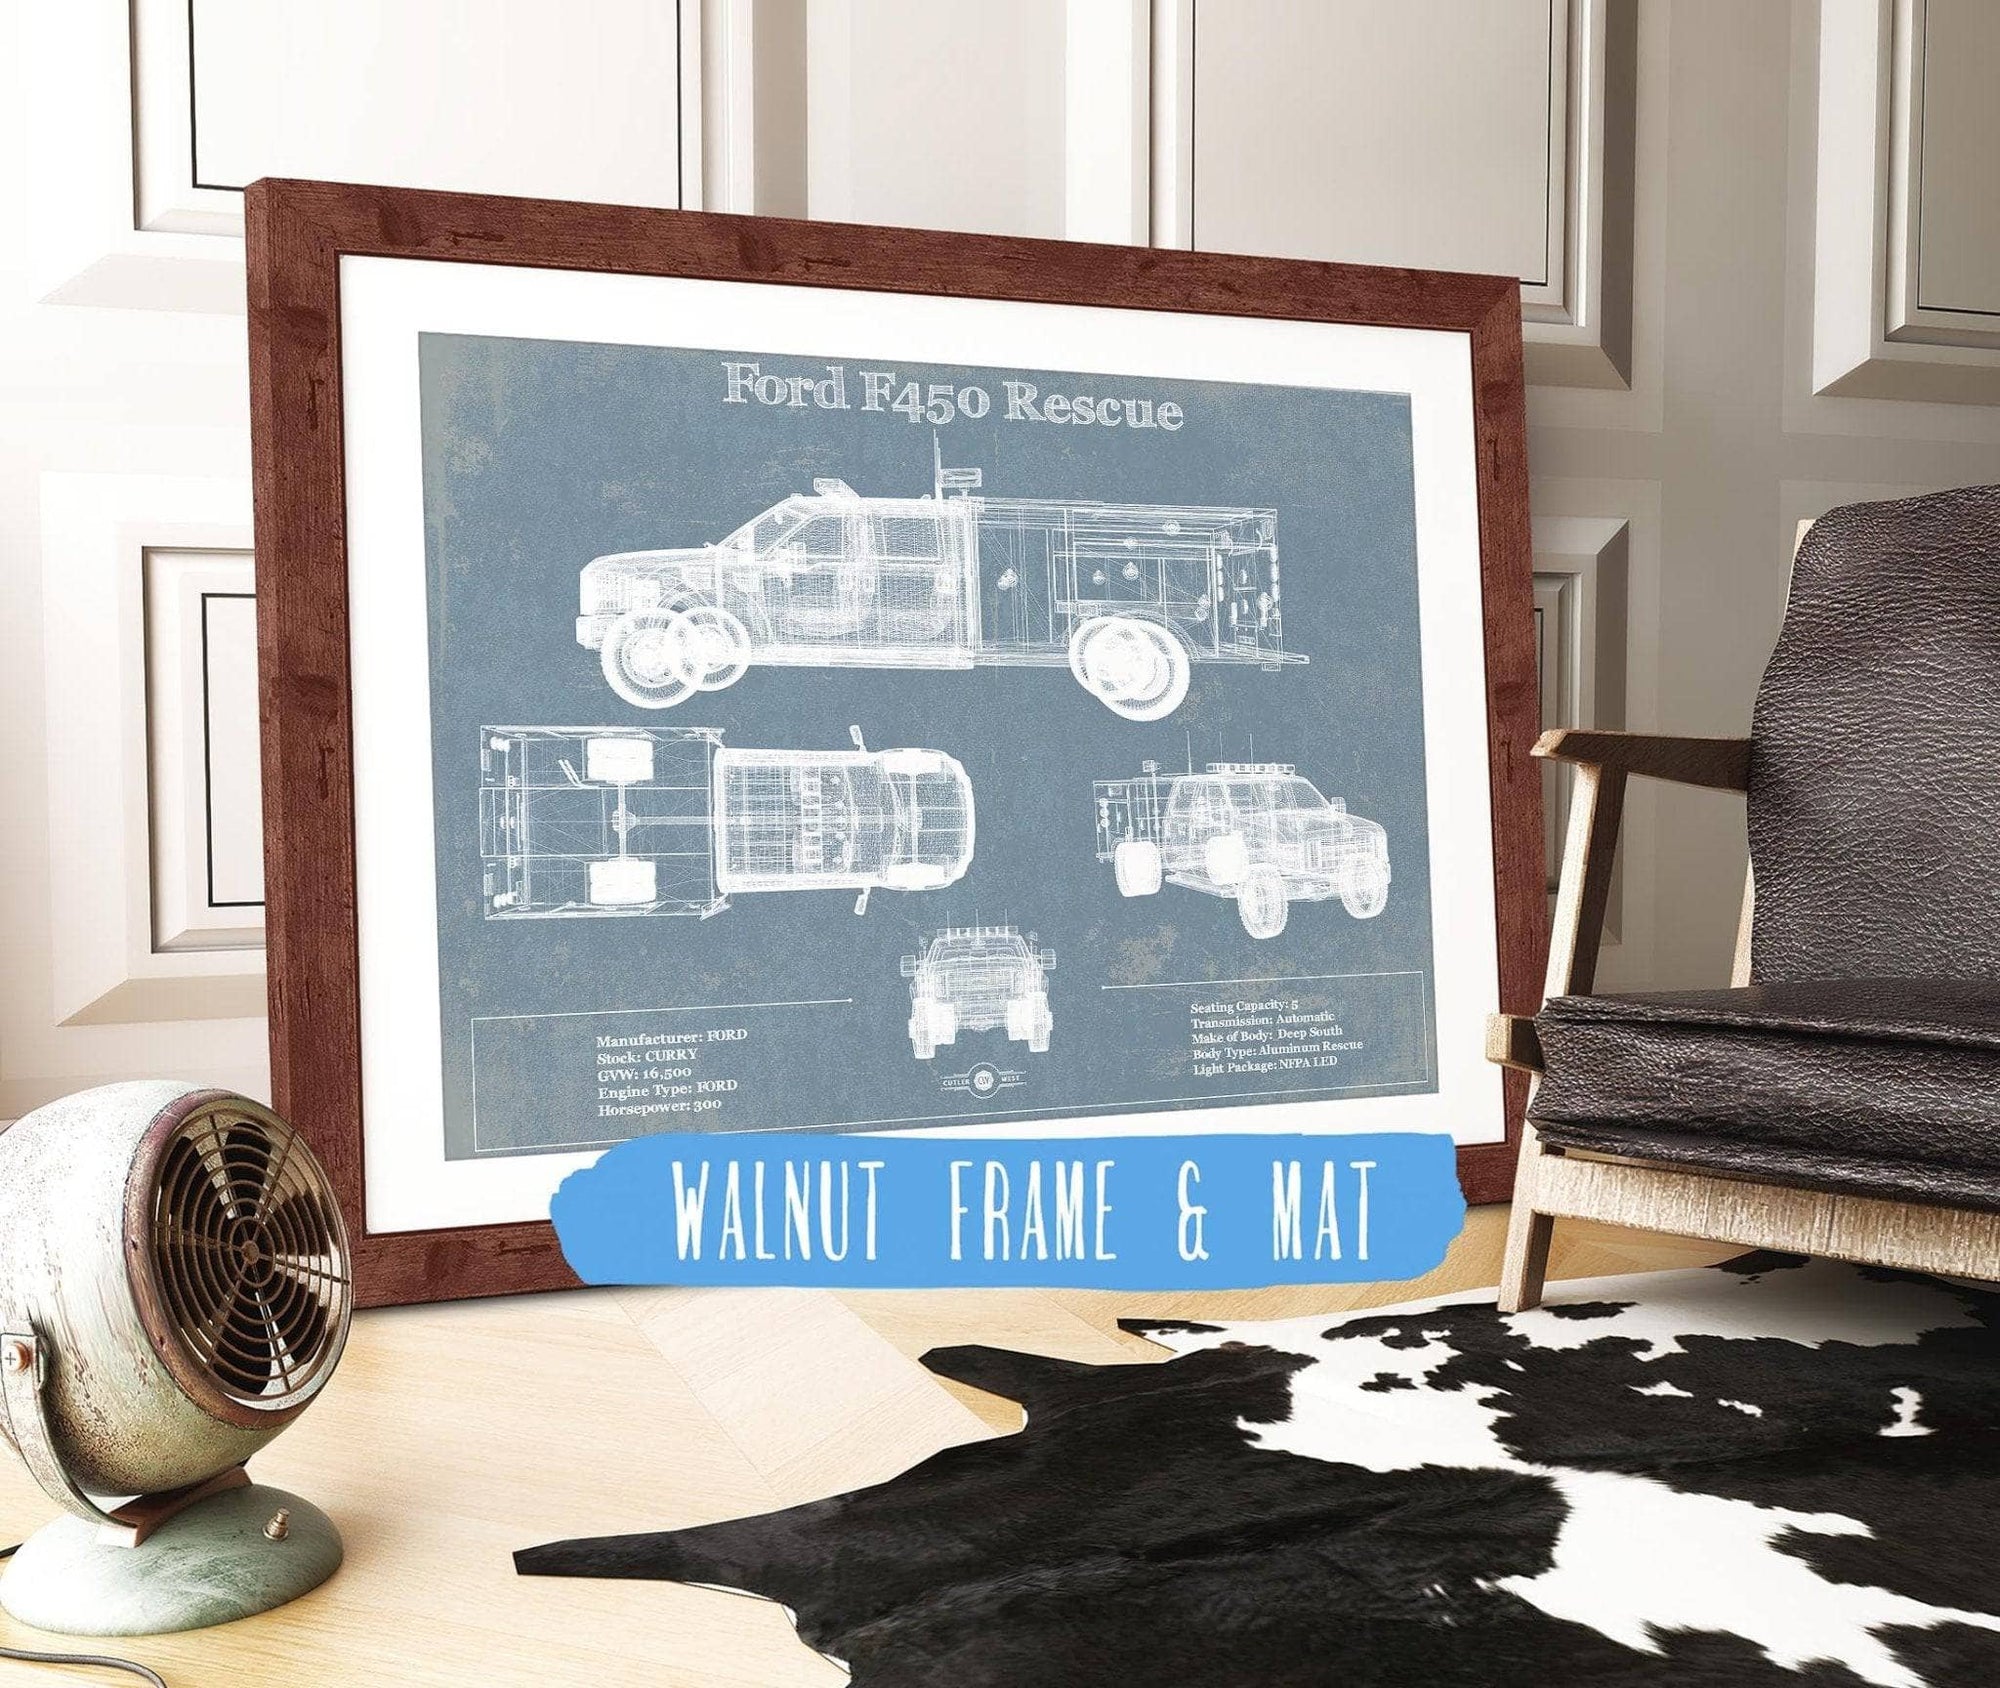 Cutler West Ford Collection 14" x 11" / Walnut Frame & Mat Ford F450 Rescue Vehicle Vintage Blueprint Auto Print 933311032_54945